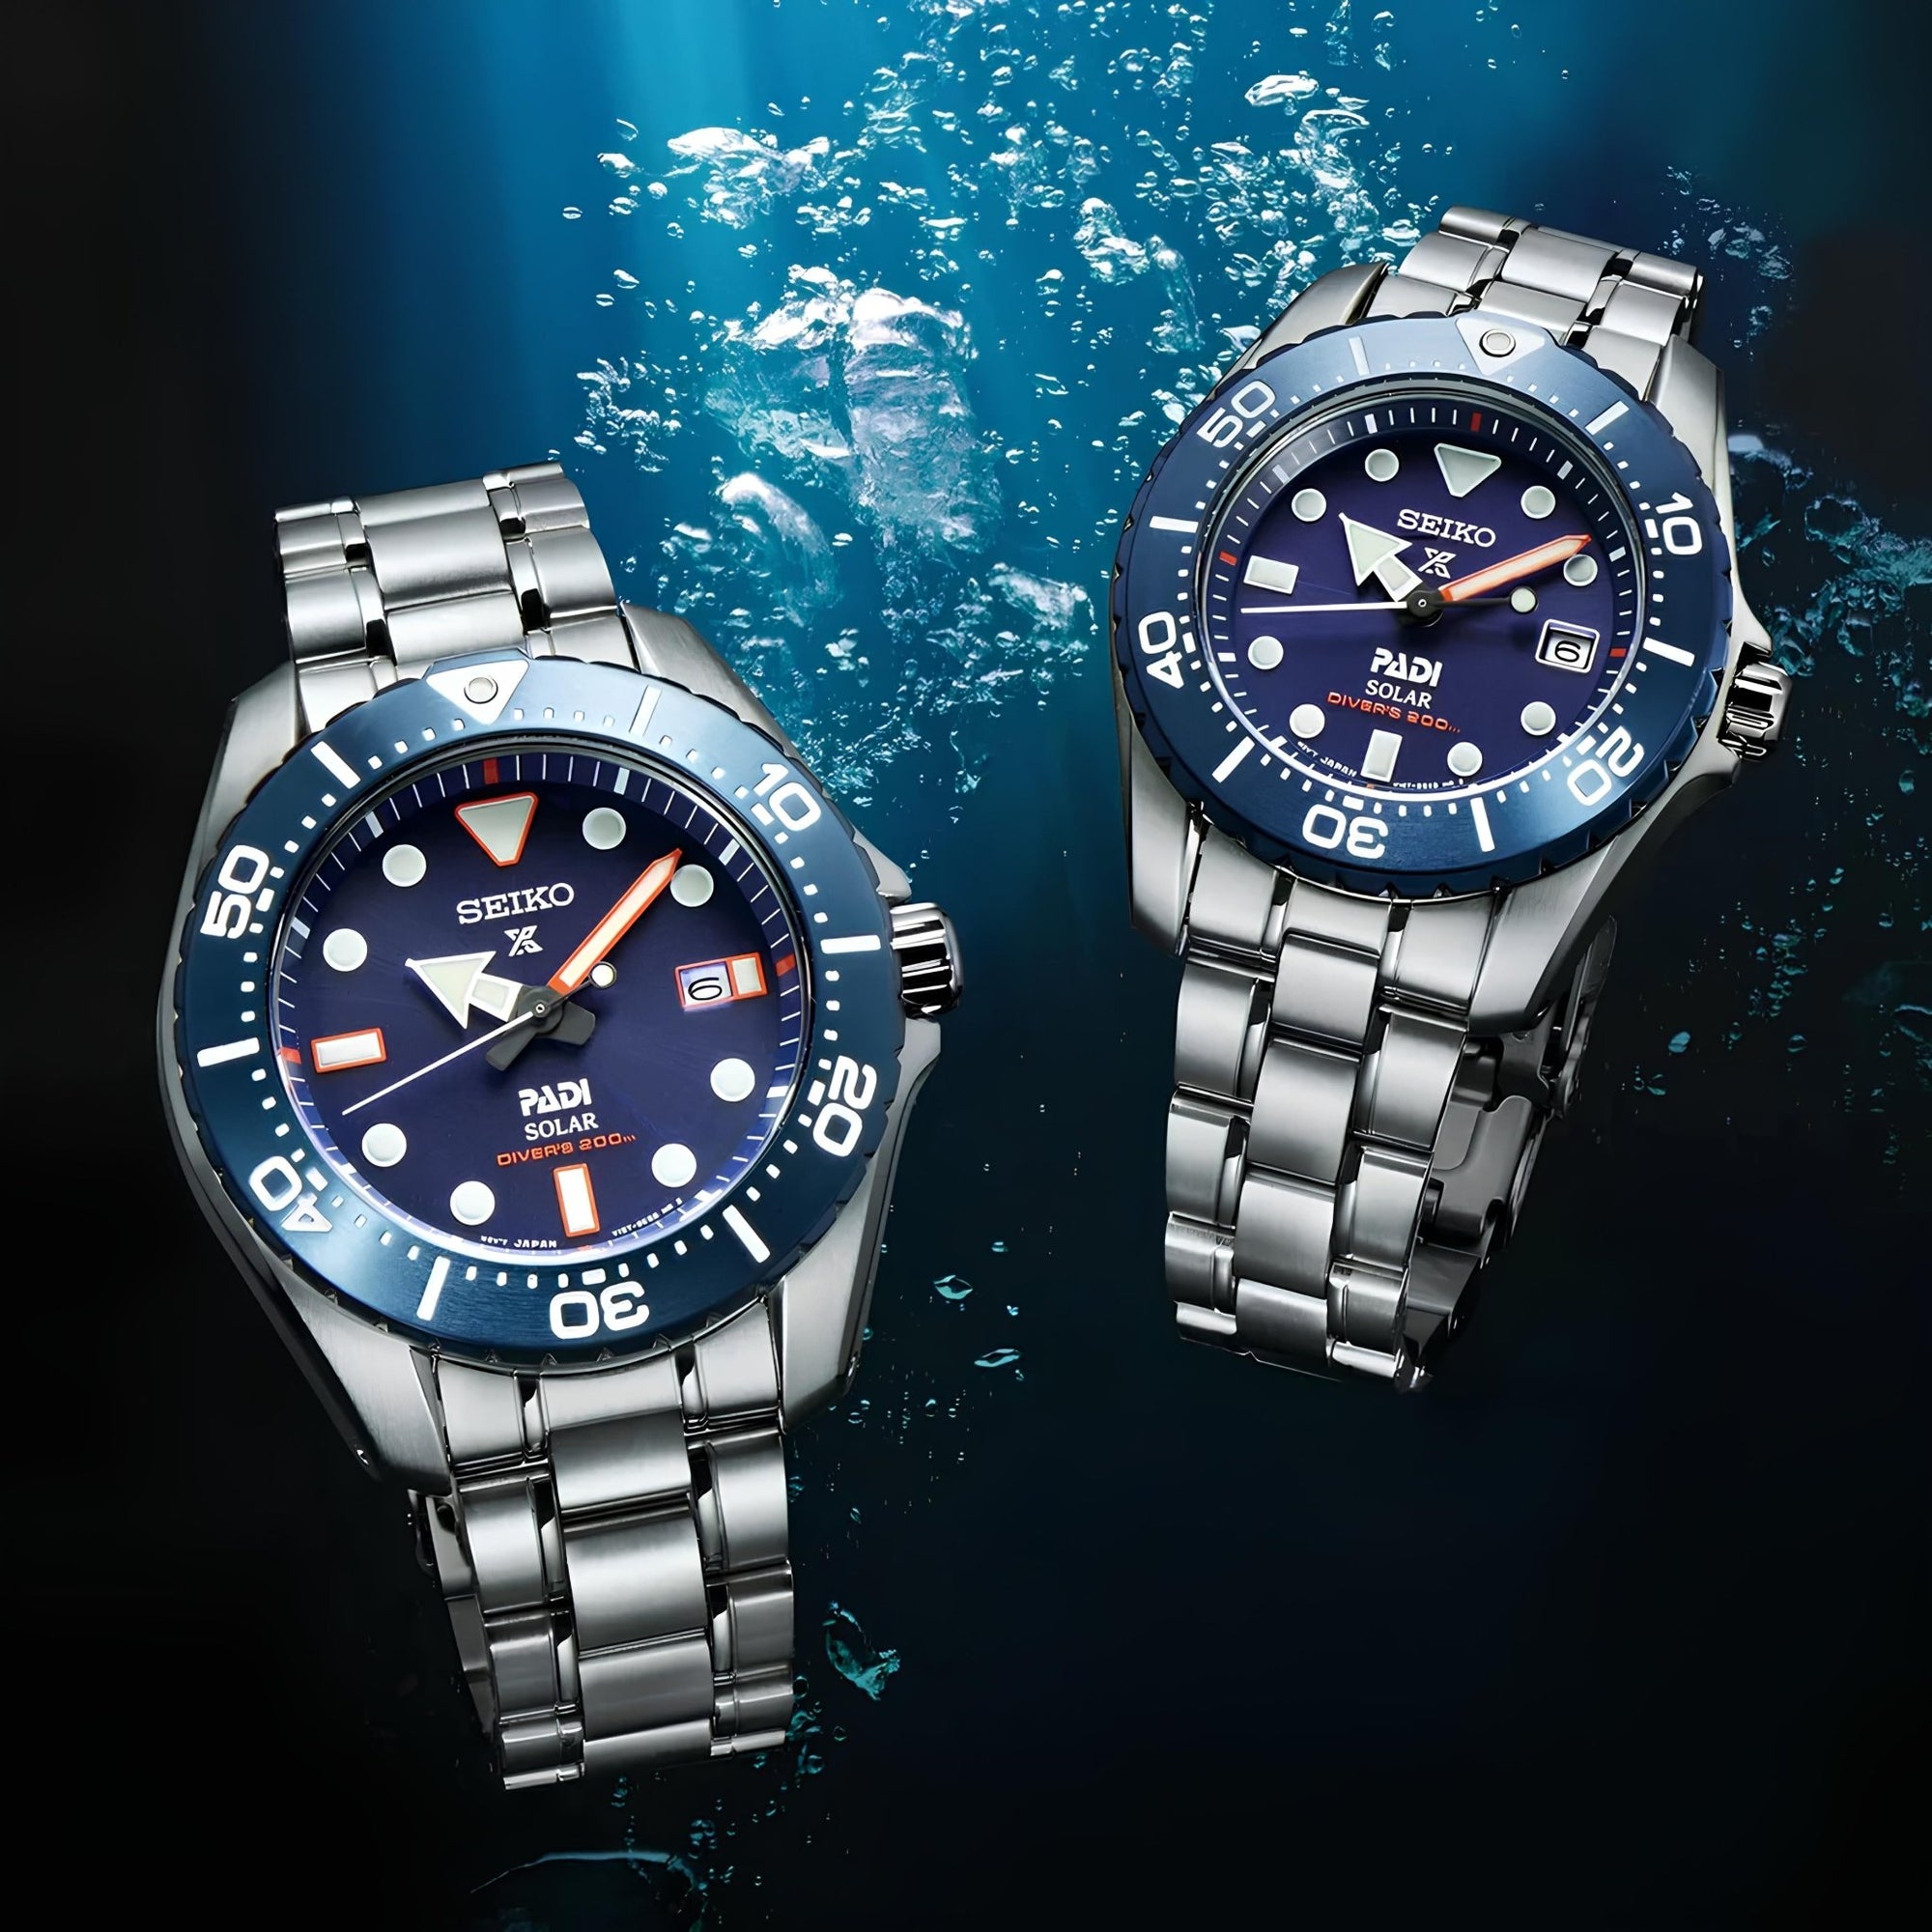 5 Seiko Watches Under 300 USD: Top Picks for the Savvy Shopper